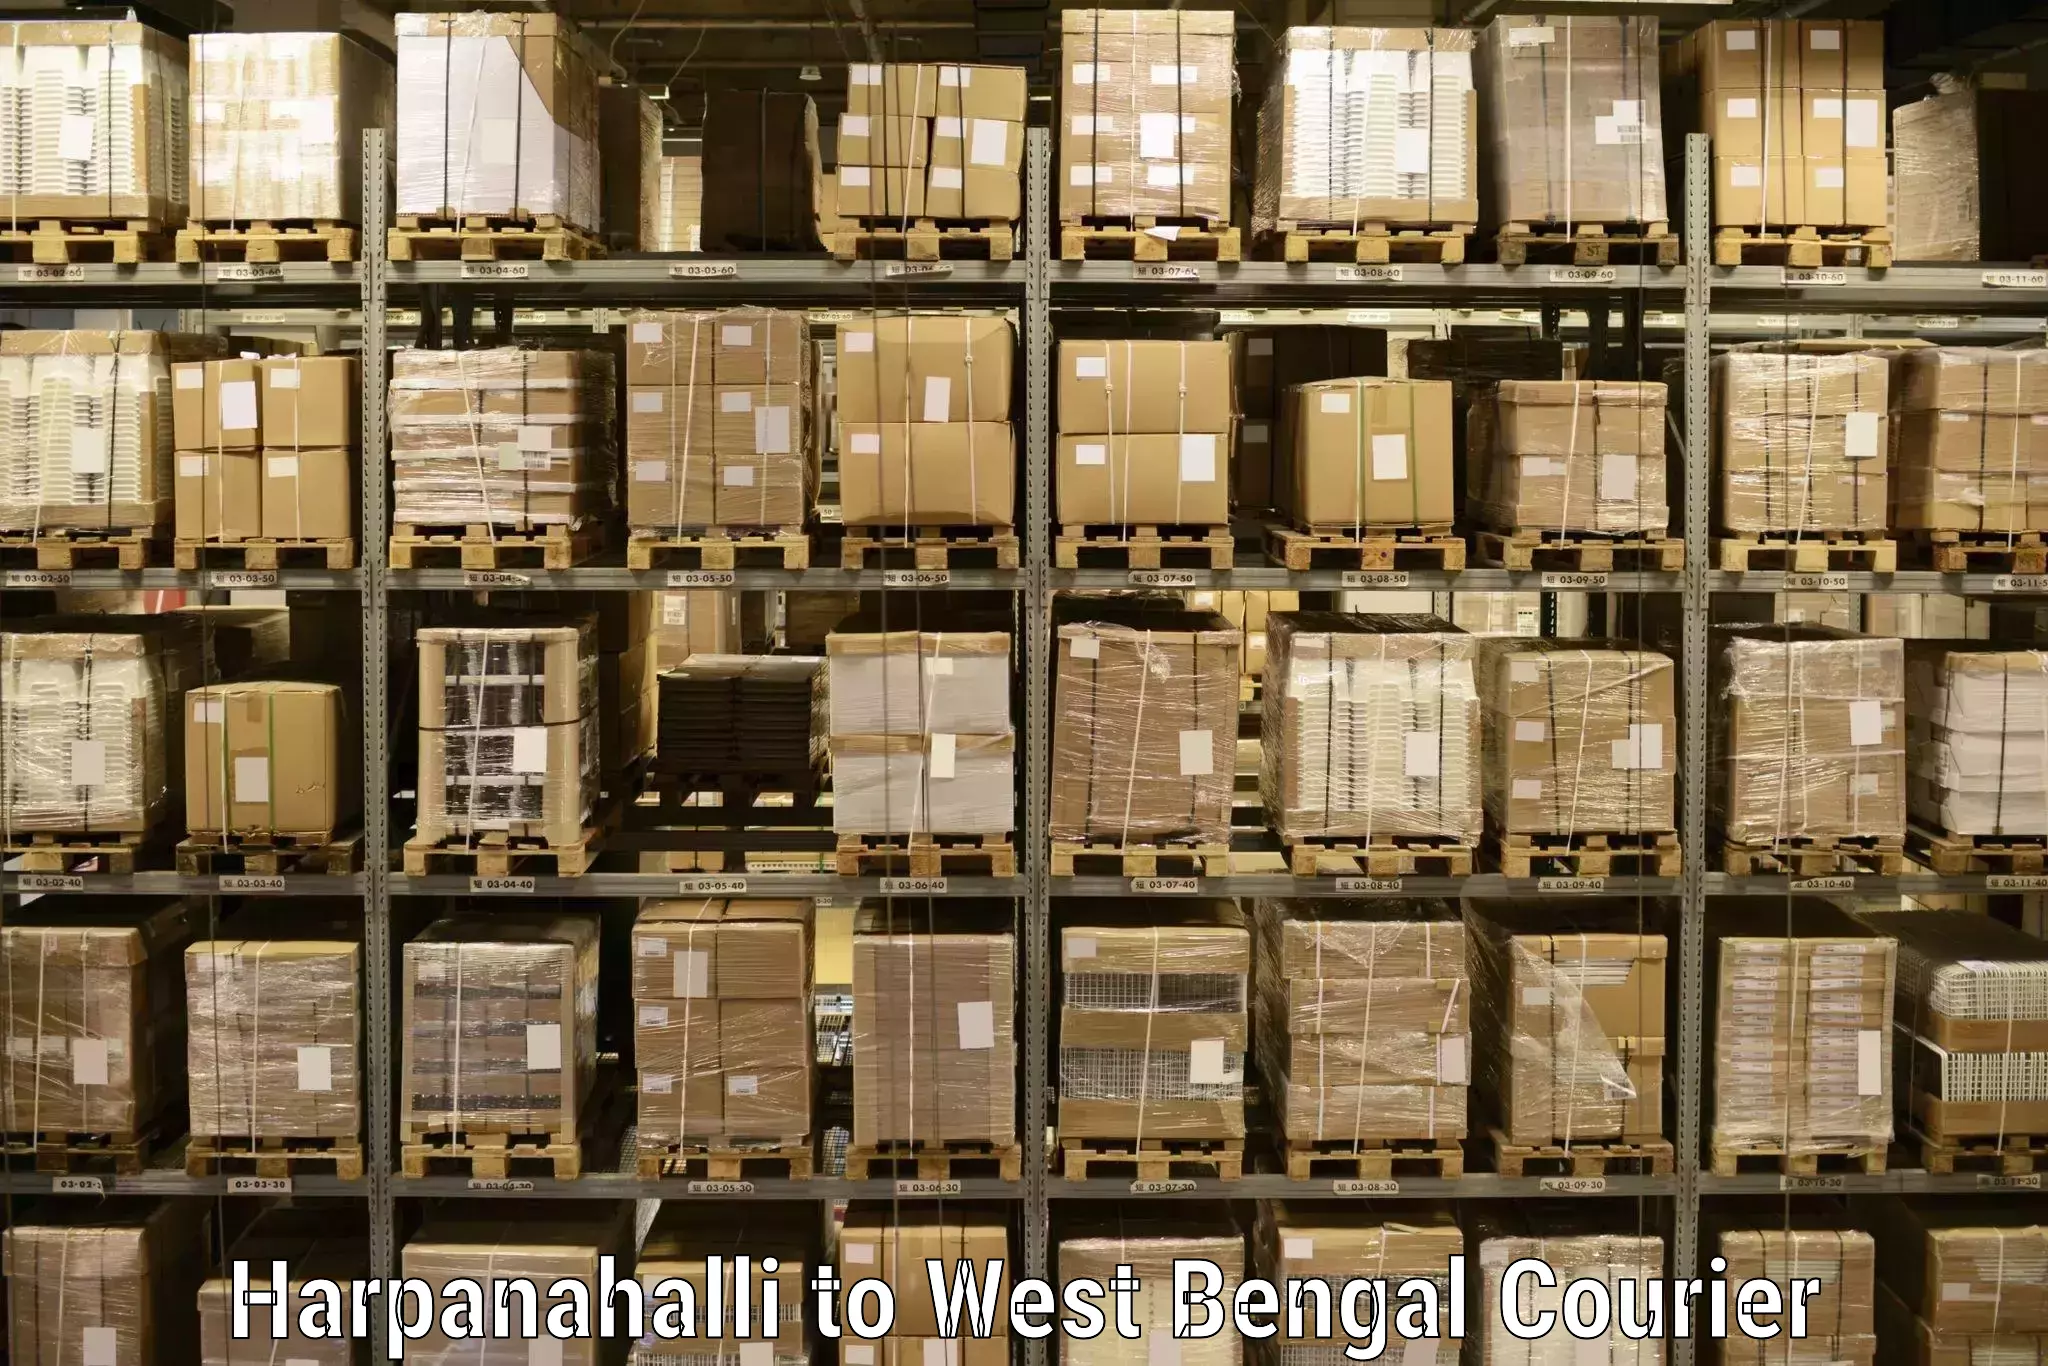 Courier service booking Harpanahalli to West Bengal